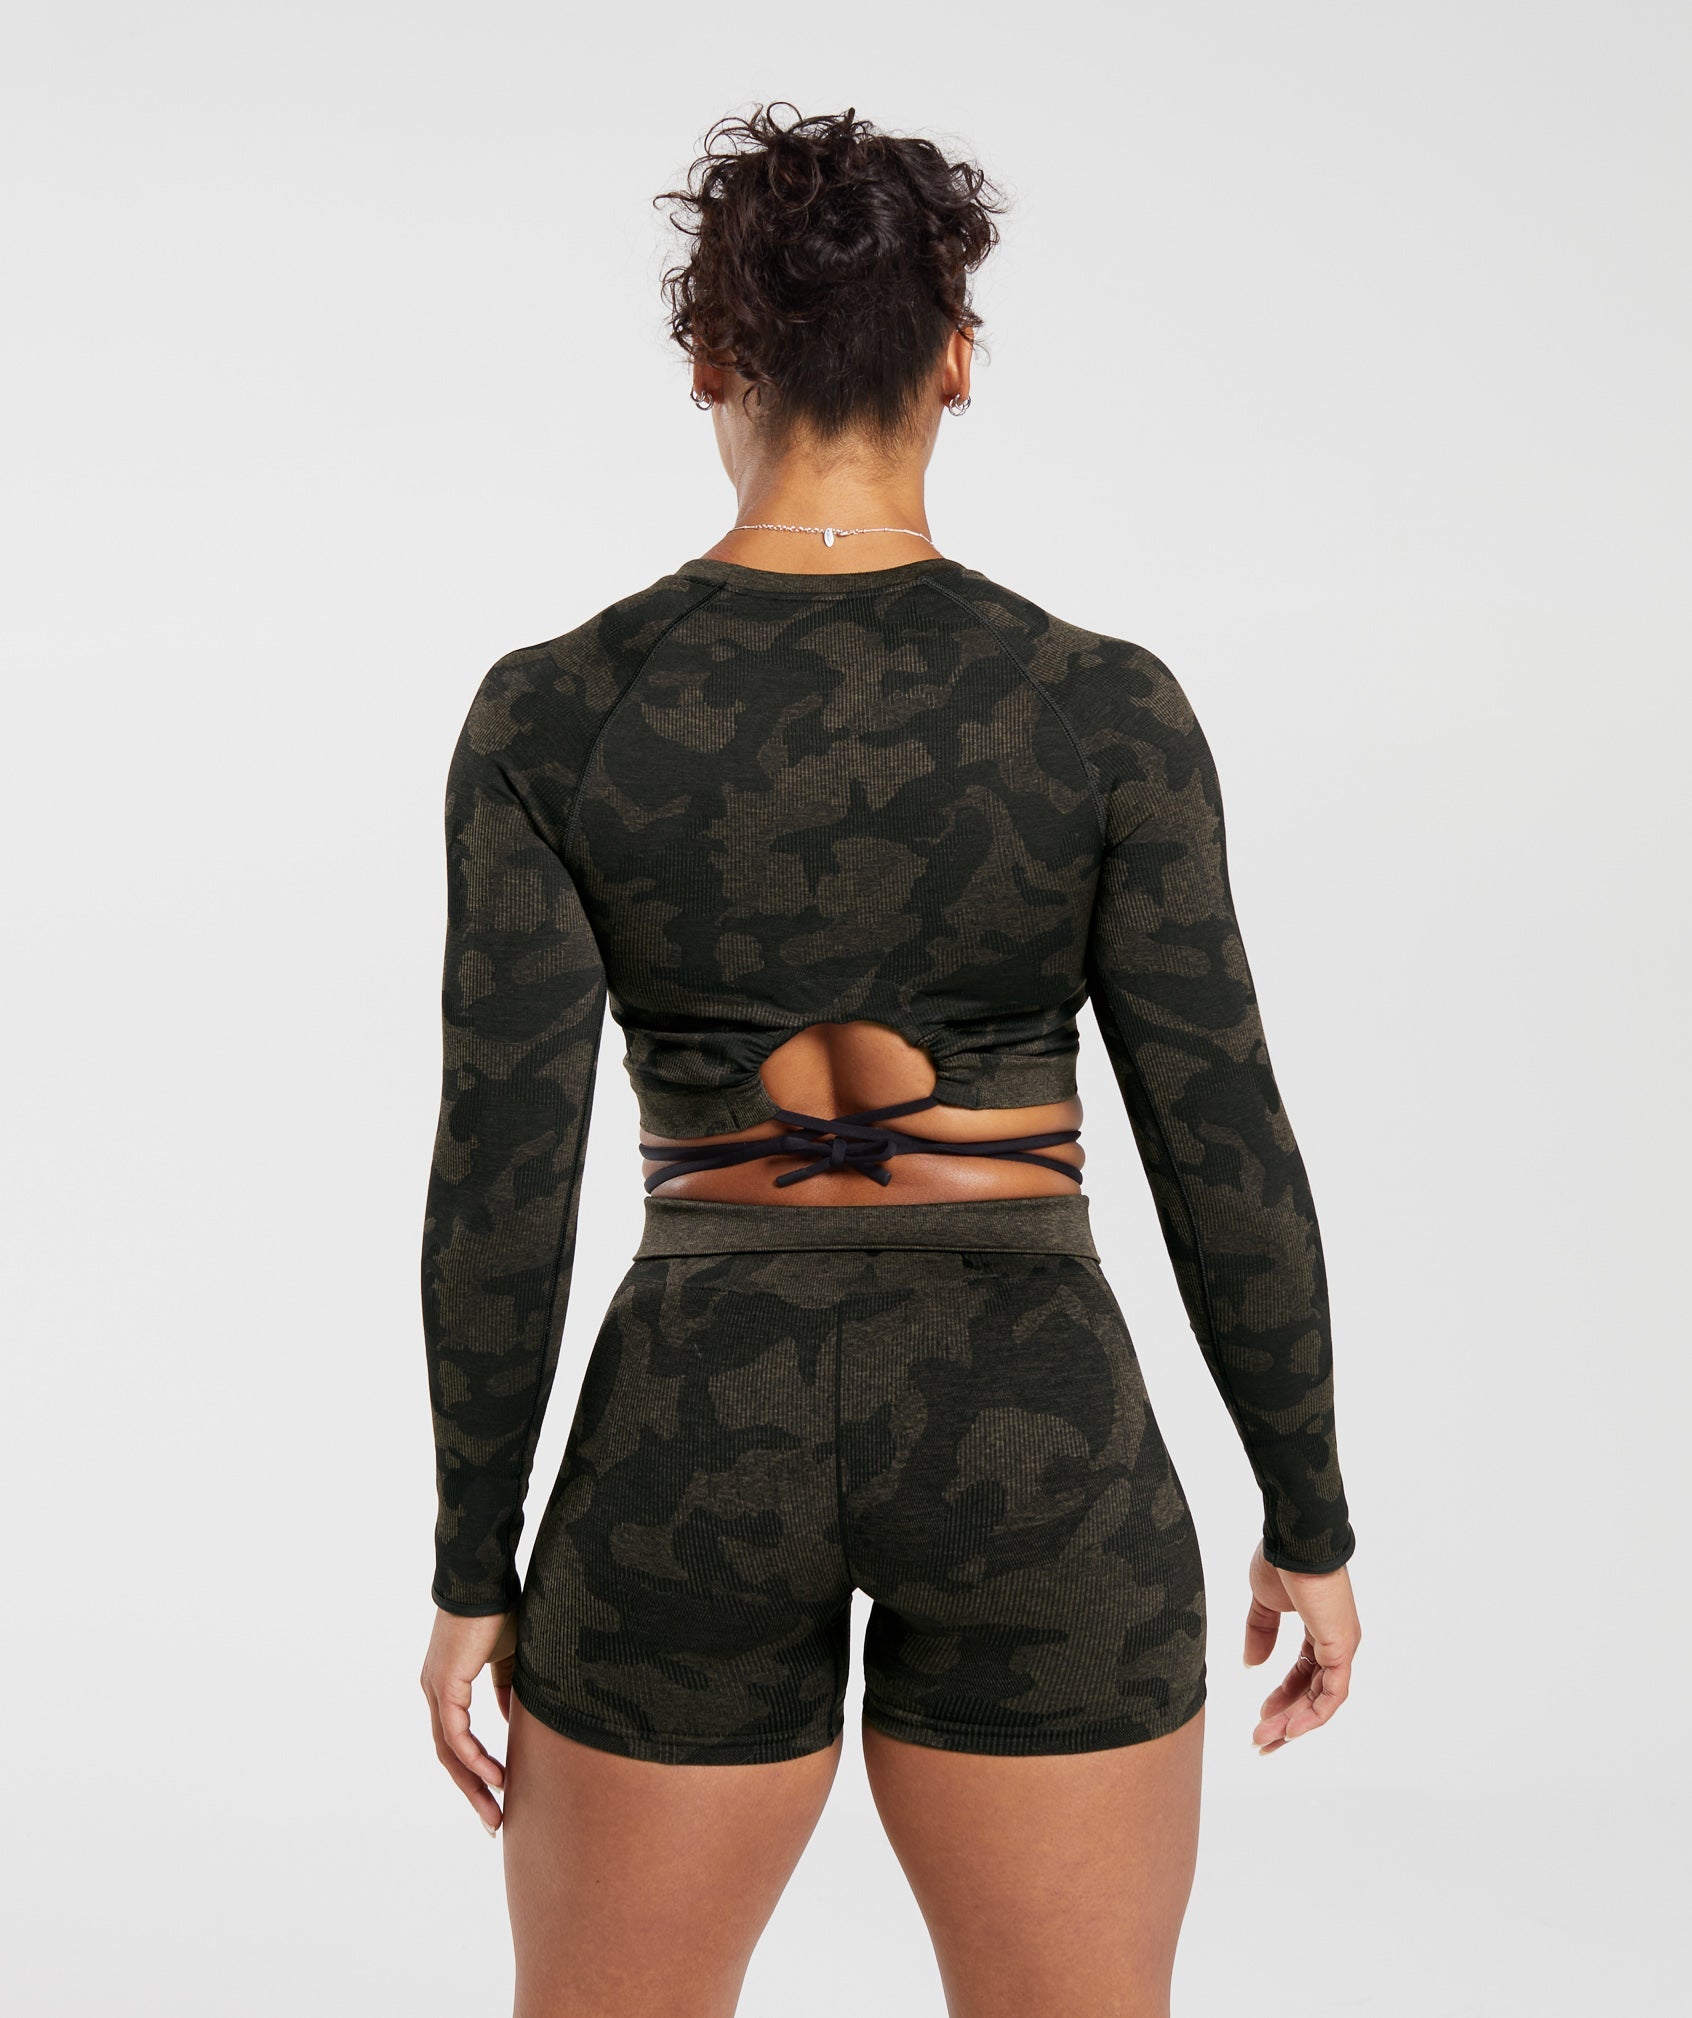 Adapt Camo Seamless Ribbed Long Sleeve Crop Top in Black/Camo Brown - view 2